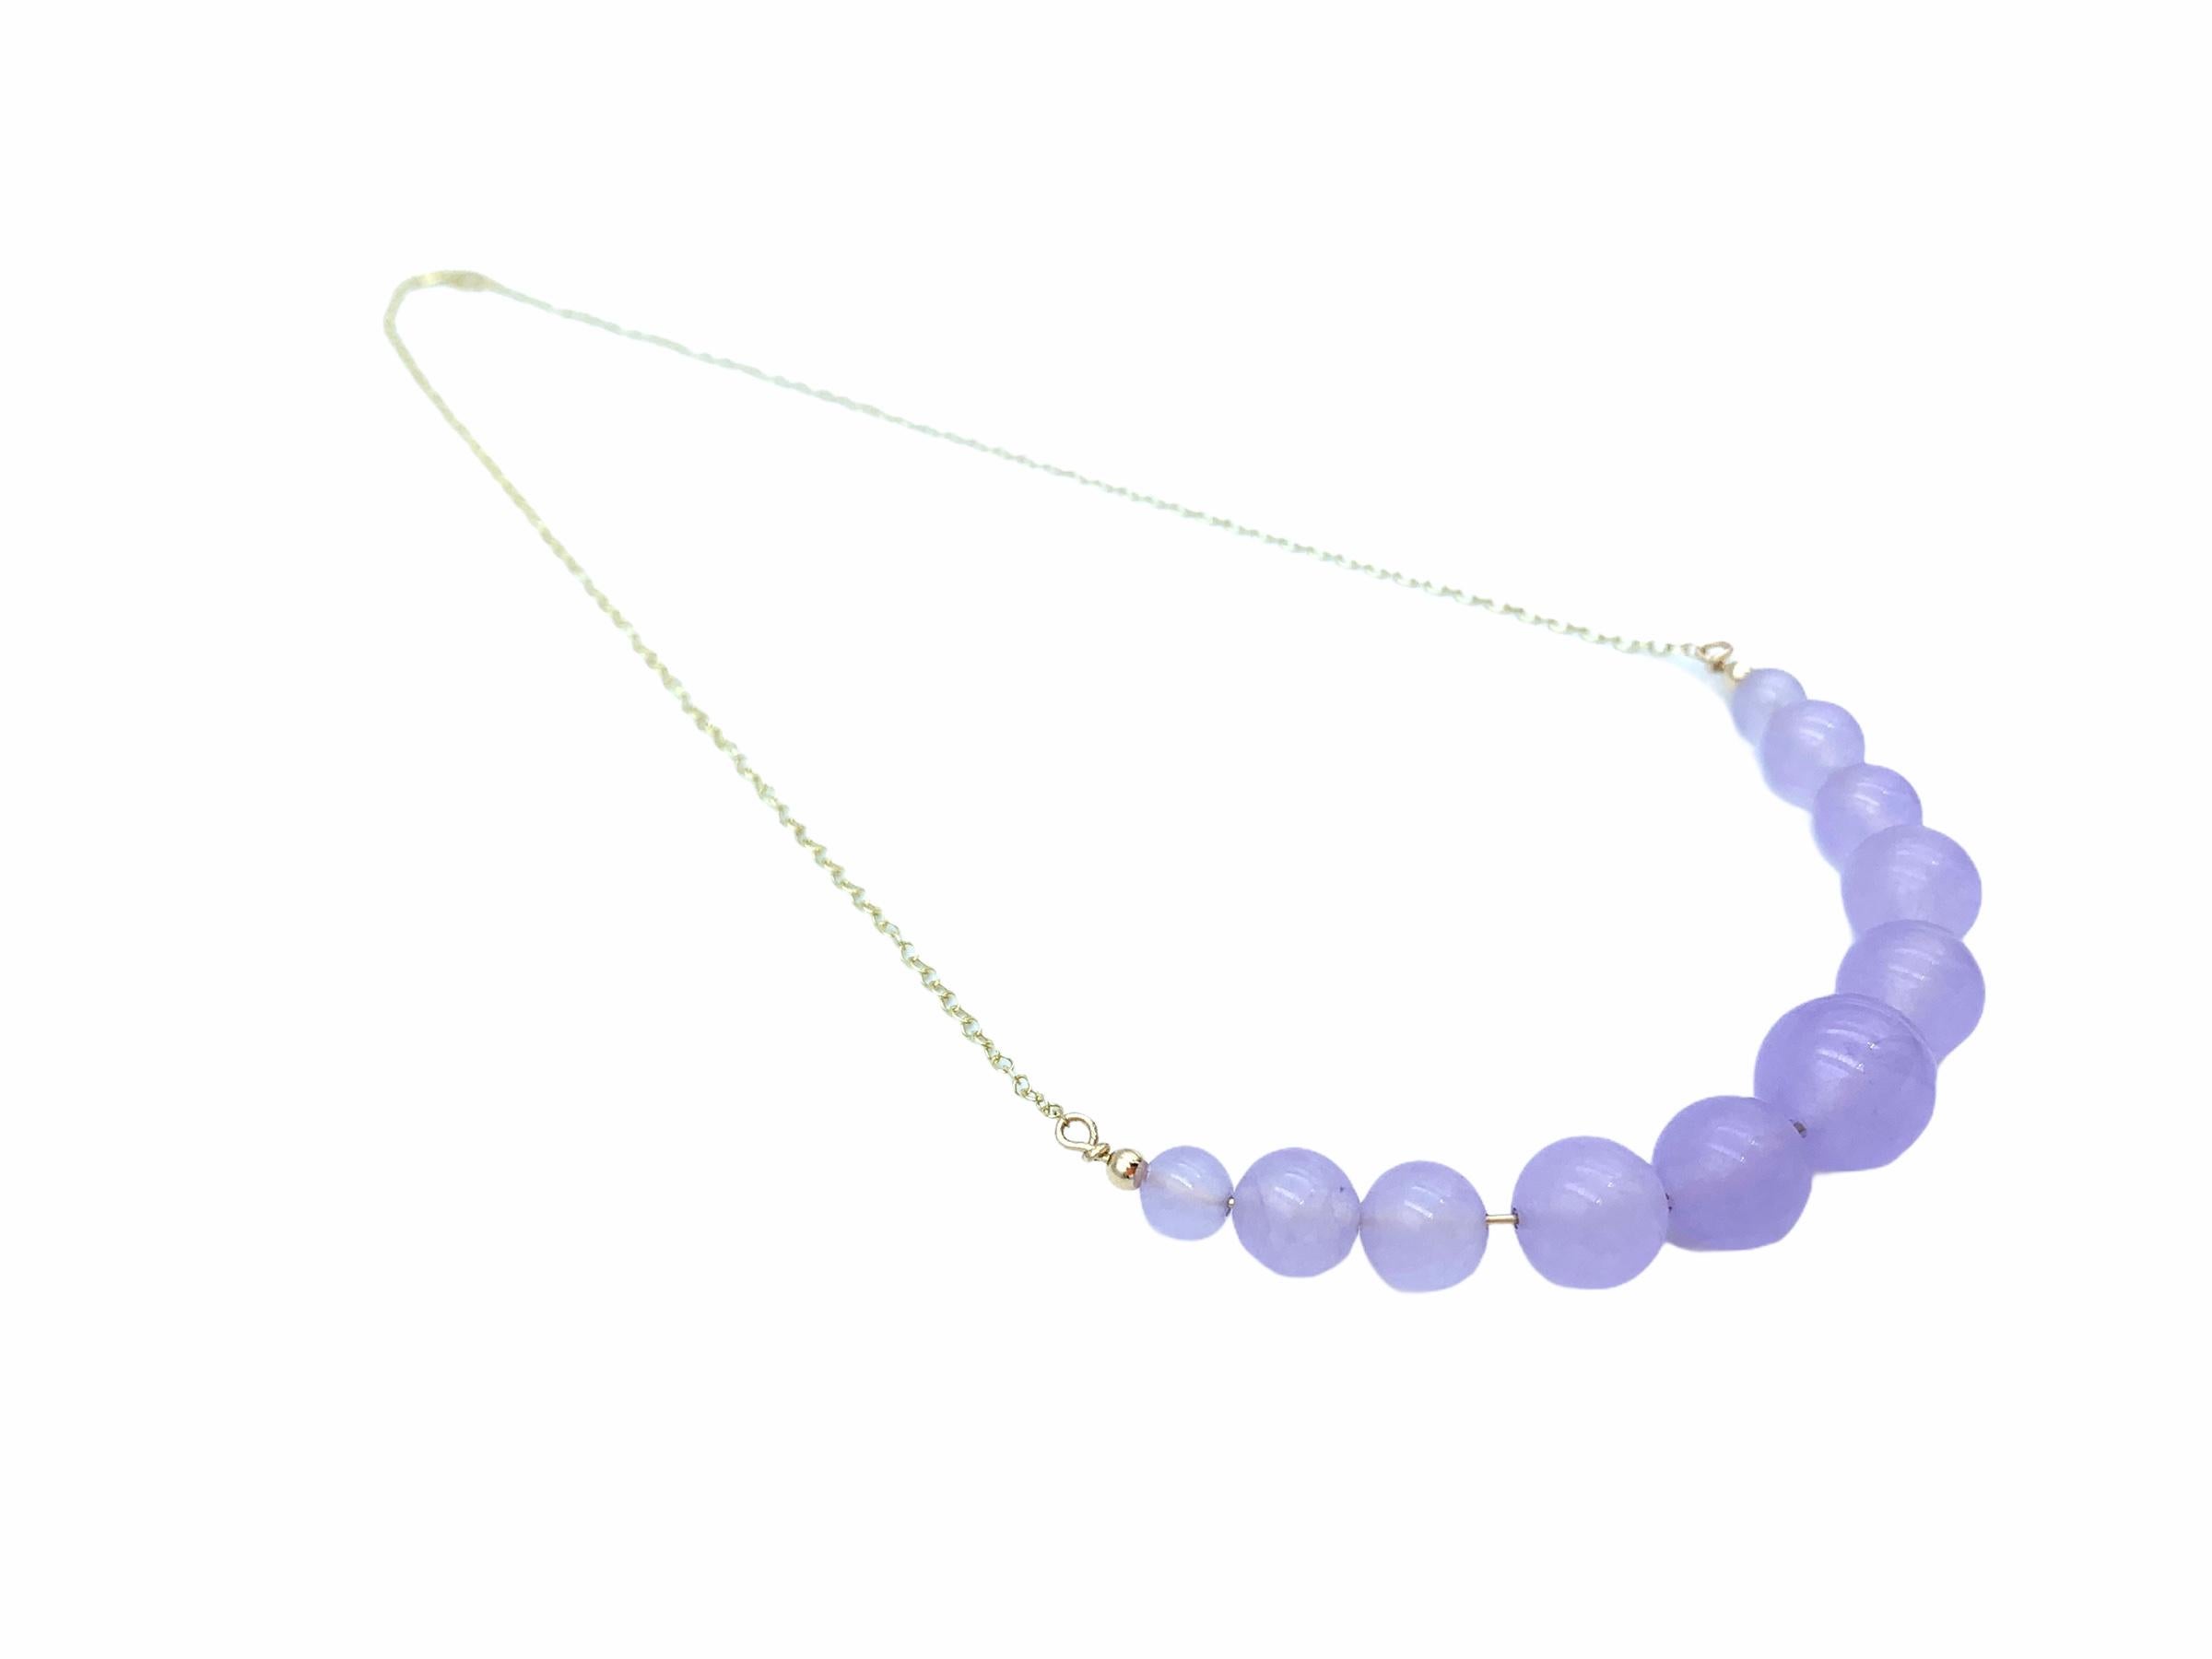 Hand made using 9 carat Yellow Gold, the suspended Lavender Chalcedony beads are threaded together with a solid gold wire and graduated onto a delicate 1.7 mm cable chain. The lovely soft lilac centre bead is 12 mm in size, 10mm the two following, 8